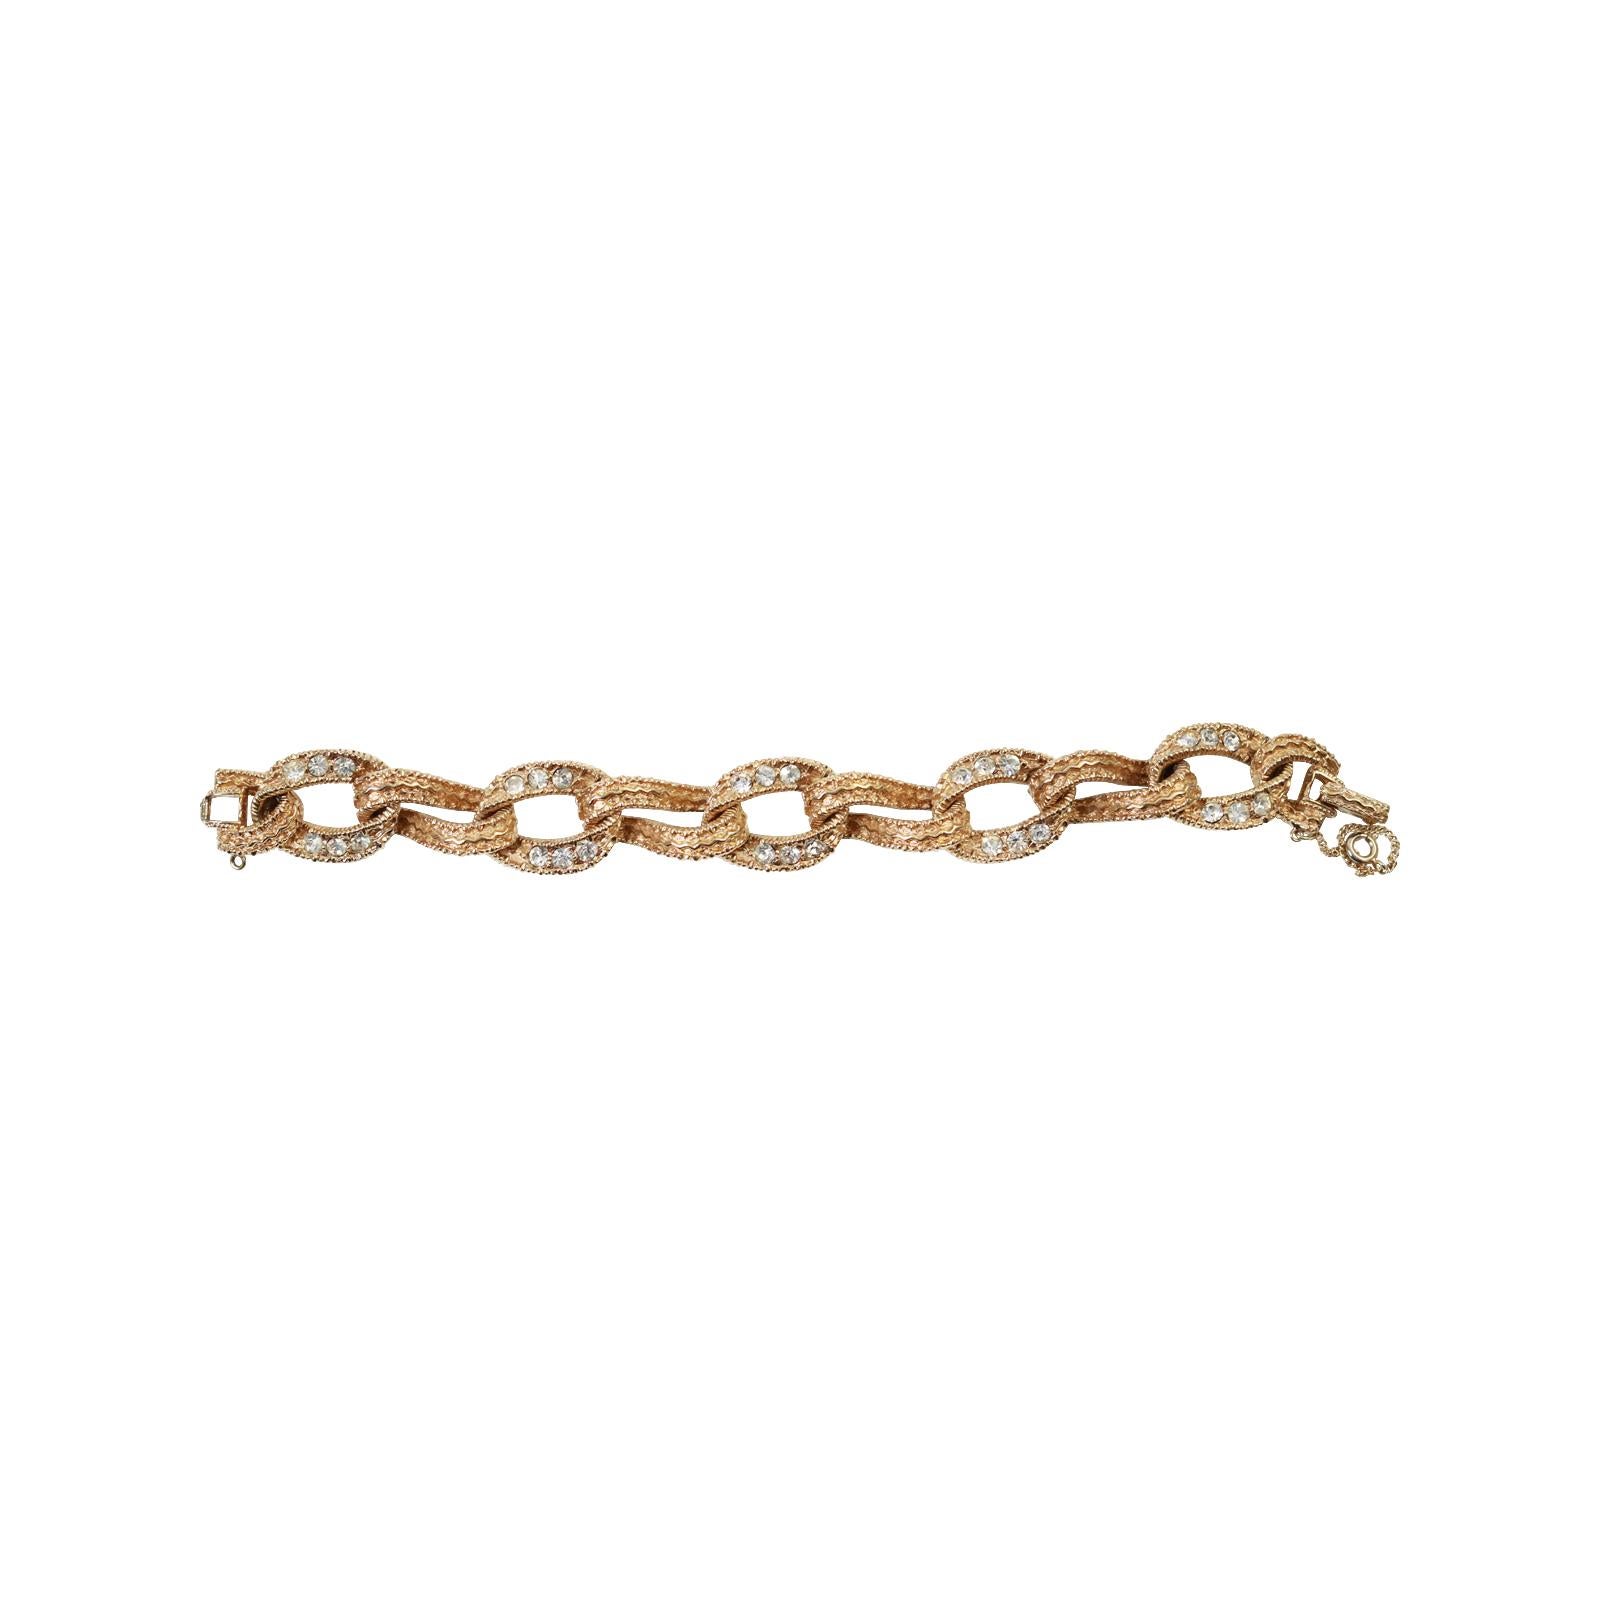 Vintage Ciner Gold Tone Diamante Link Bracelet Circa 1980s.  It is a classic that has been made throughout the centuries.  Will be great stacked up or can be worn alone.  Can be mixed and matched with fine.  Always in style.

Ciner is no longer in